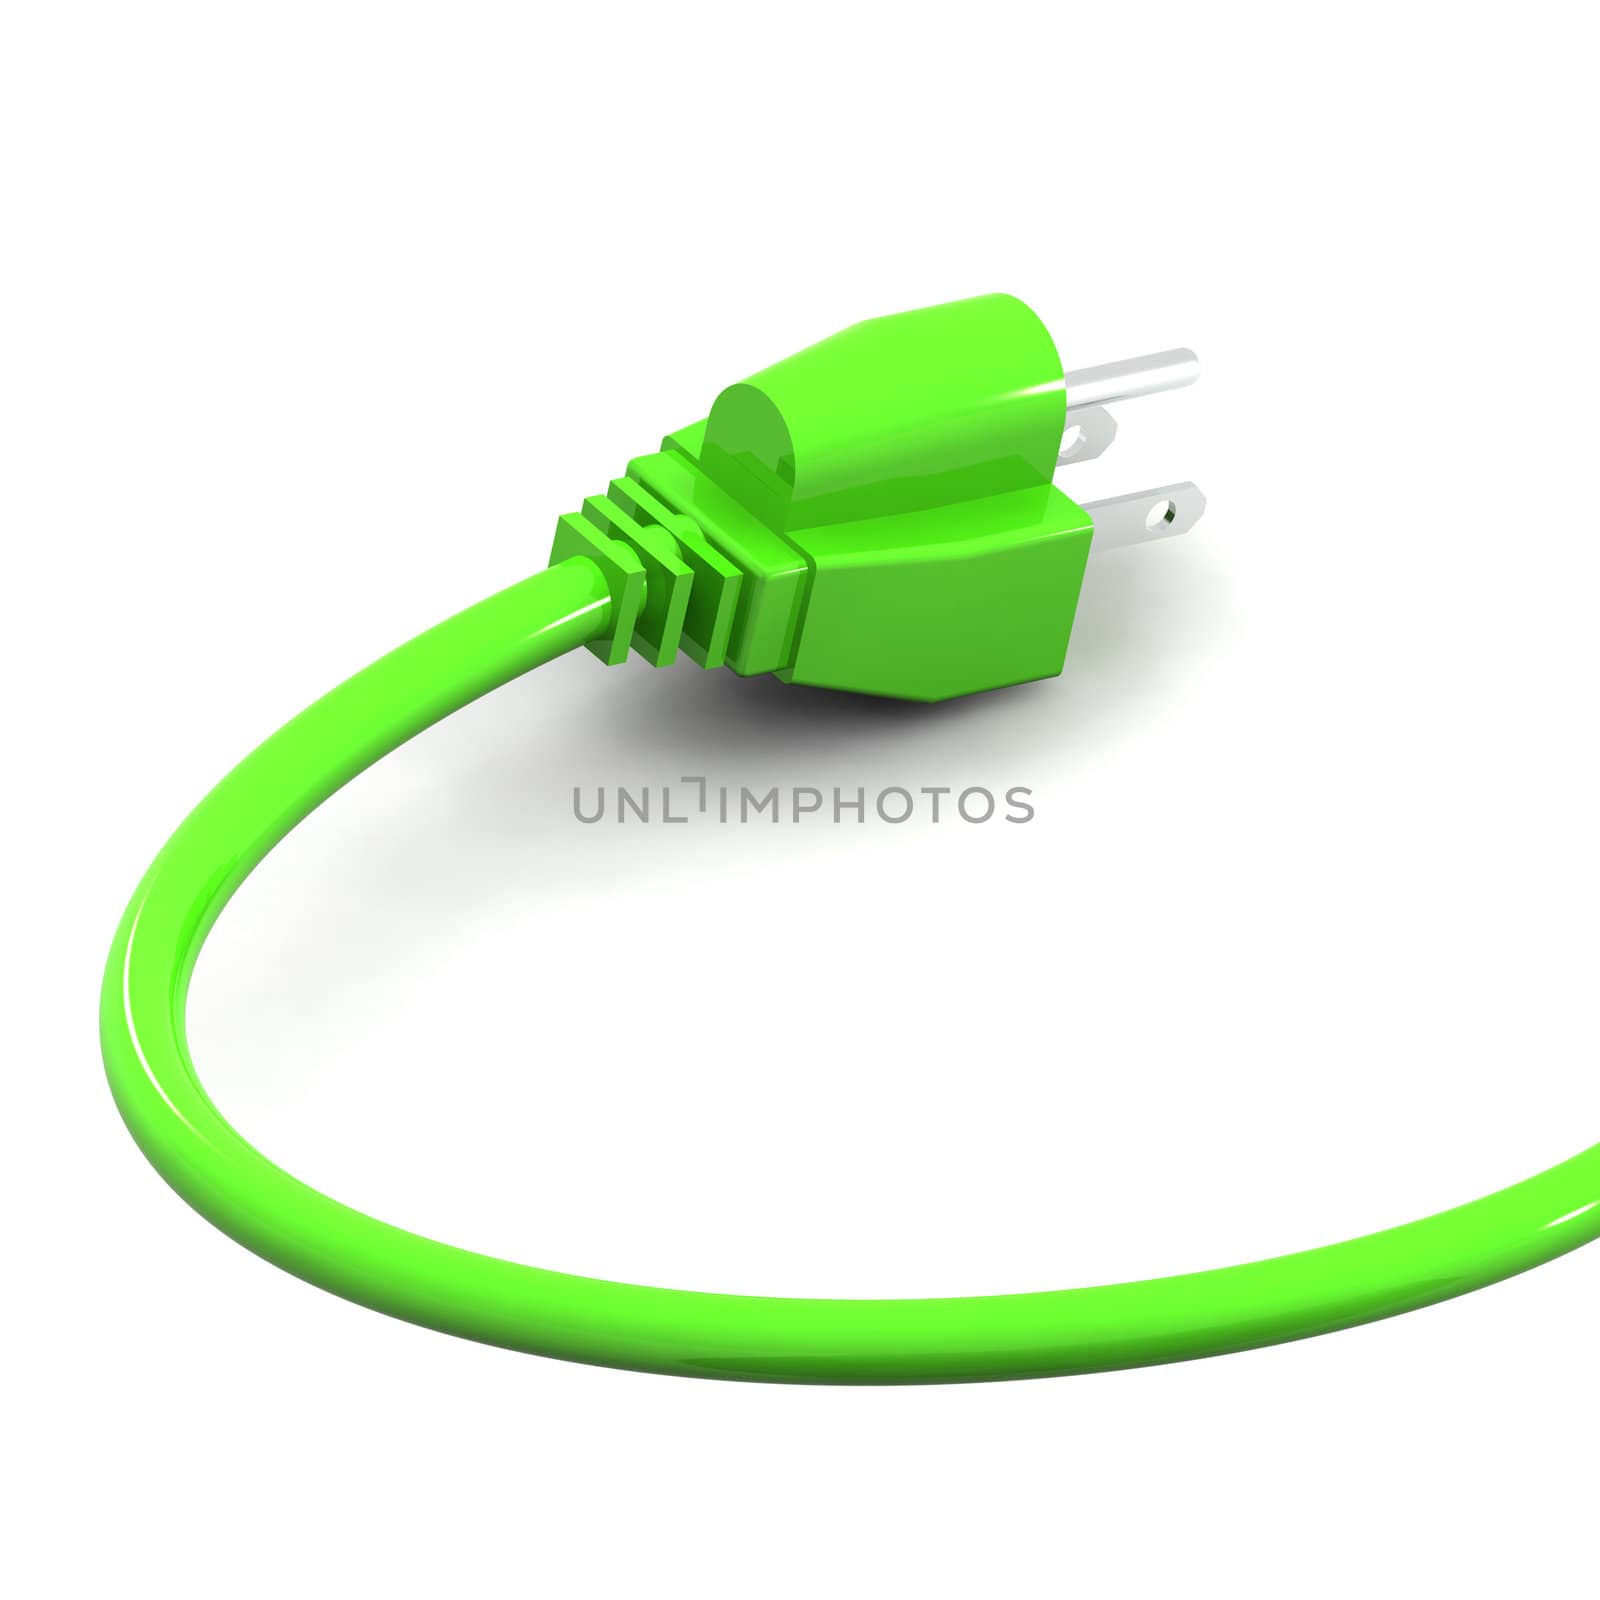 A Colourful 3d Rendered Green Power Concept Illustration